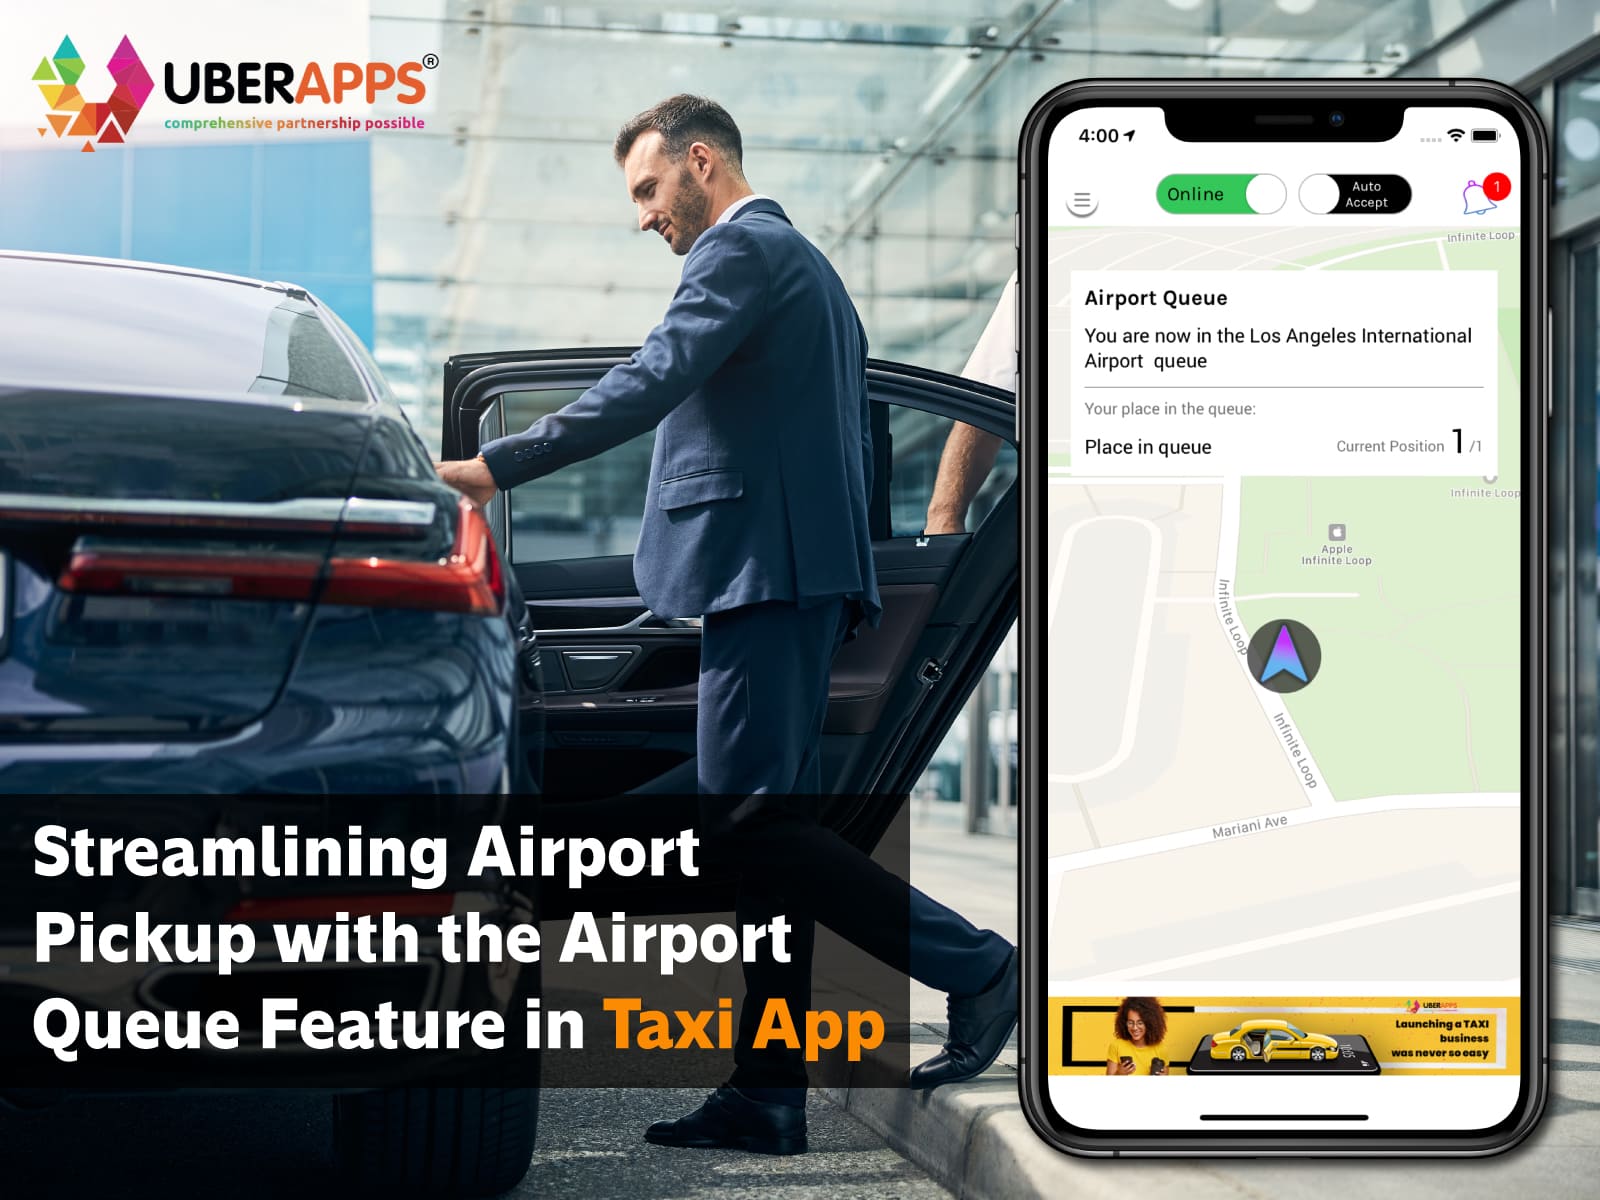 Streamlining Airport Pickup with the Airport Queue Feature in Taxi App